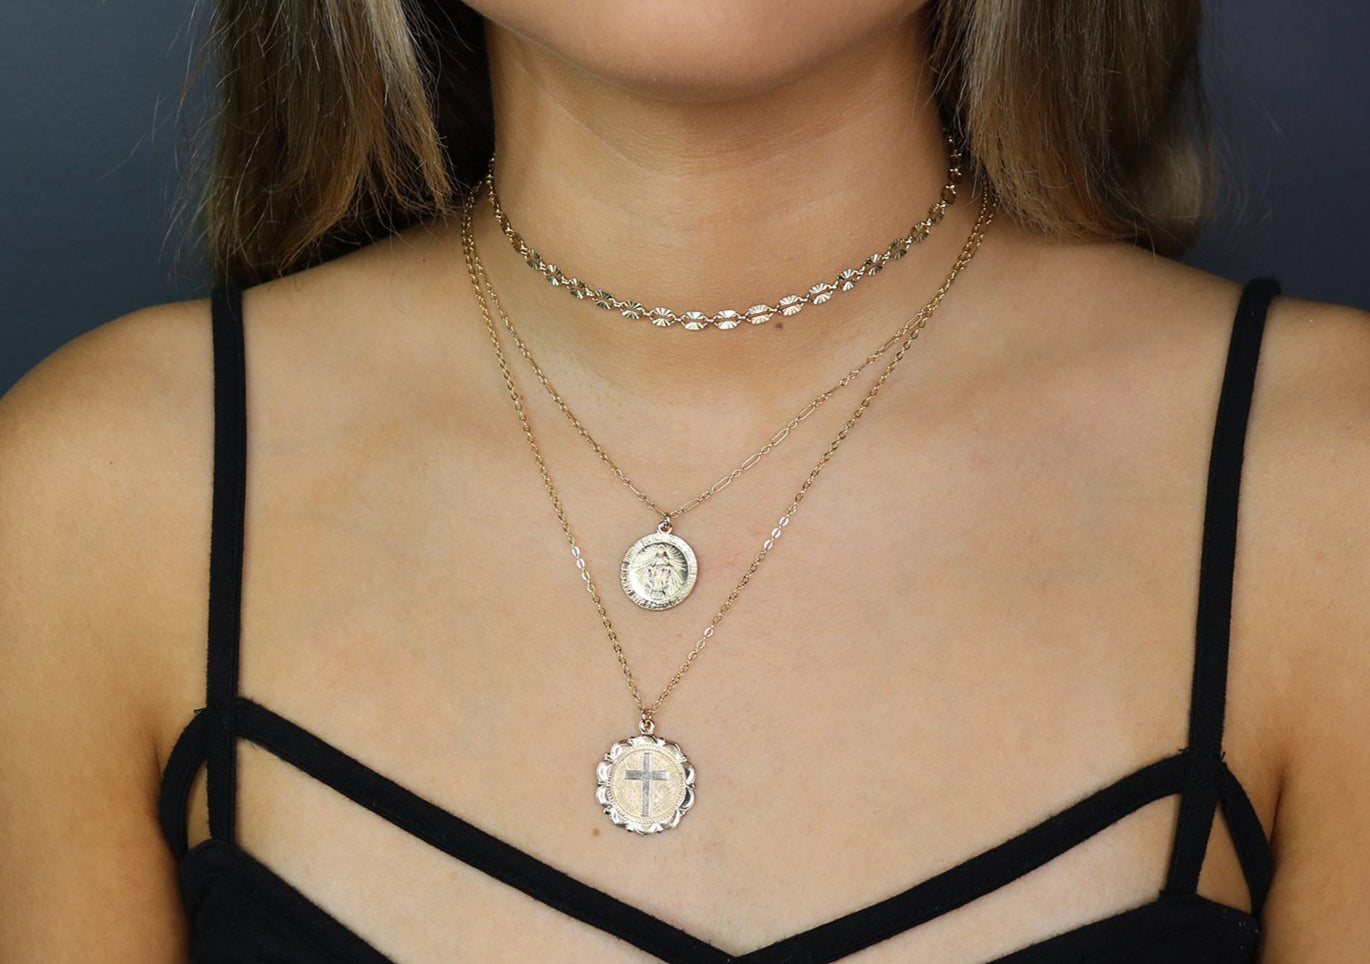 Sign of the Cross Coin Necklace